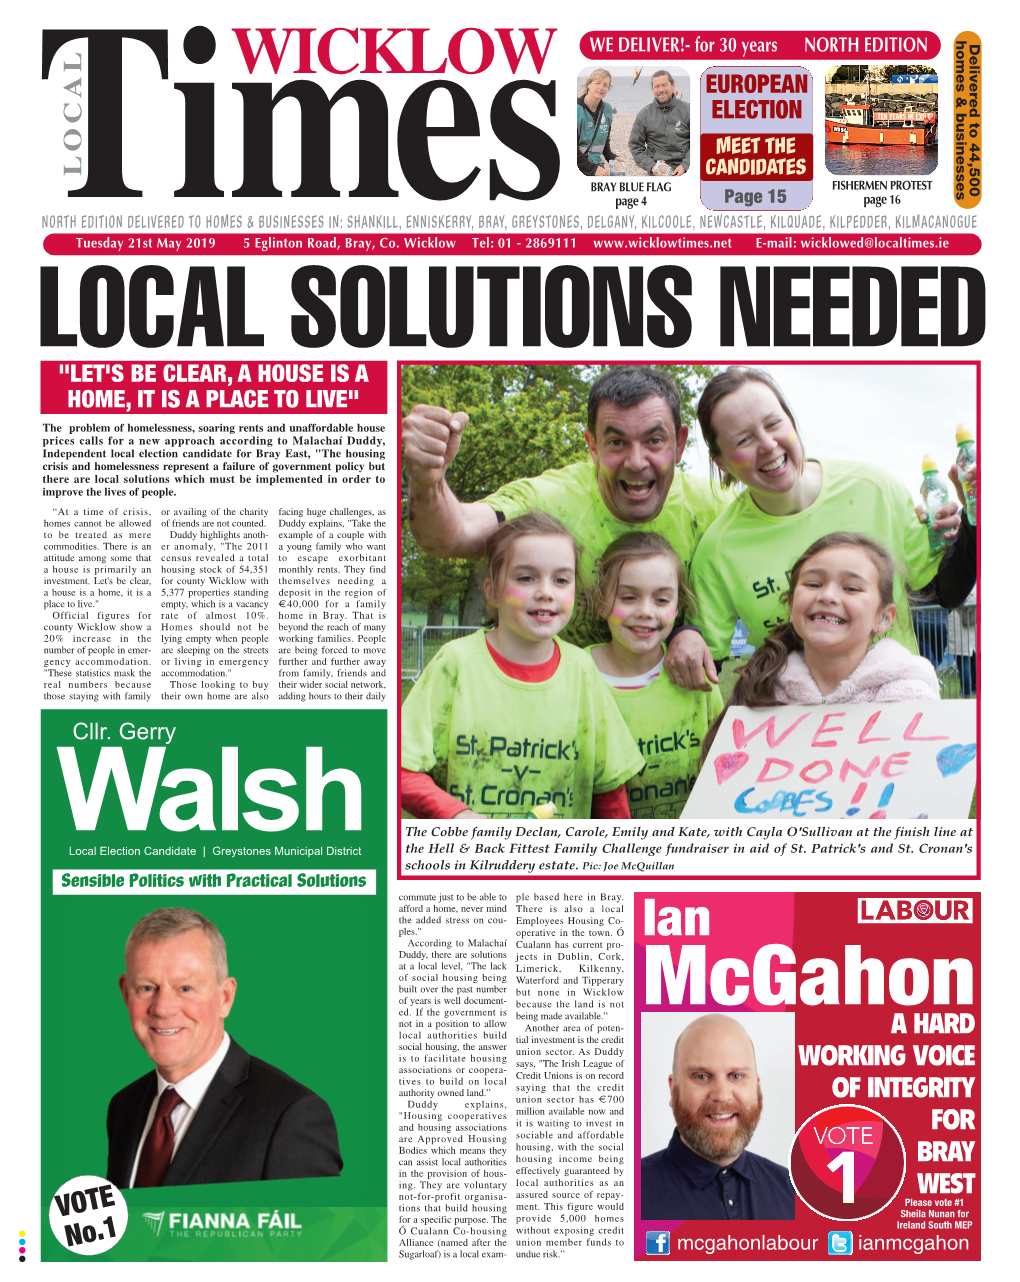 Wicklow Times 21-5-19 North